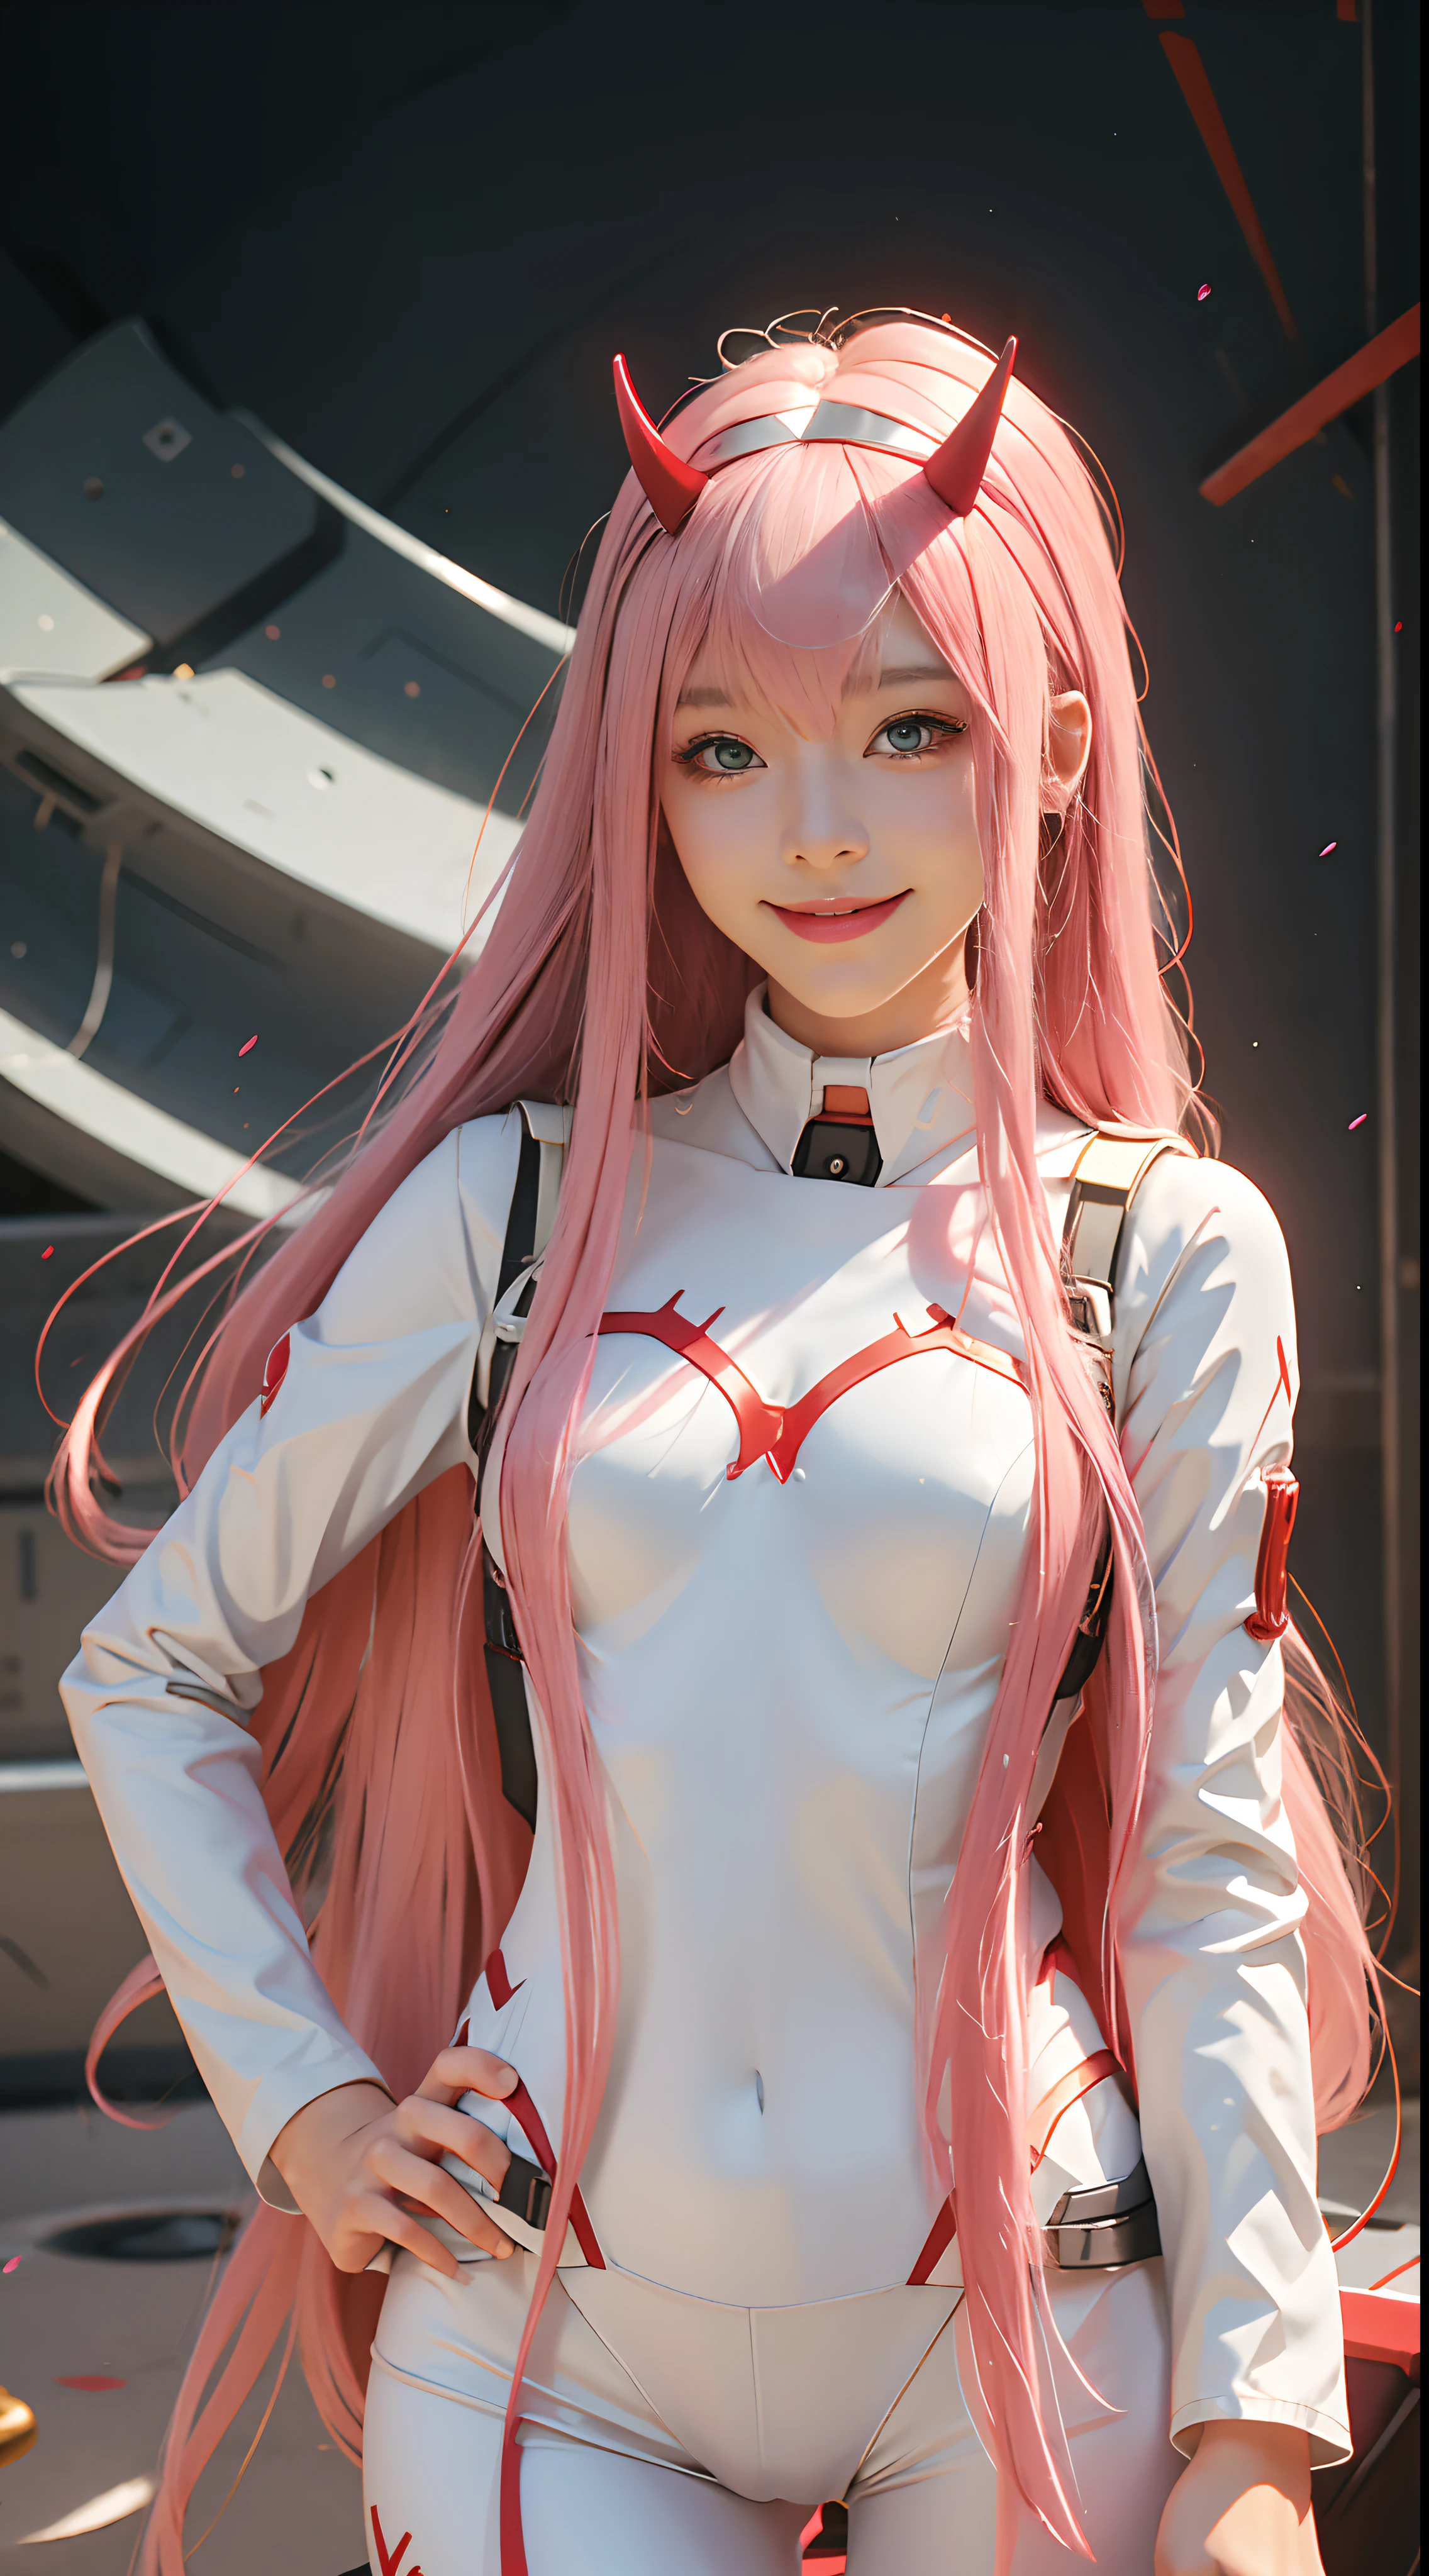 Zerotwo \(darling on franxx\), darling on franxx, 1girll, rim, self-shot, Smiling, Biting, black shadows, Green eyes, hair behind head, Horns, Long hair, Makeup, Small breasts, pilotsuit, White bodysuit, Pink hair, Red eyeshadow, Science fiction, taut skin, Solo